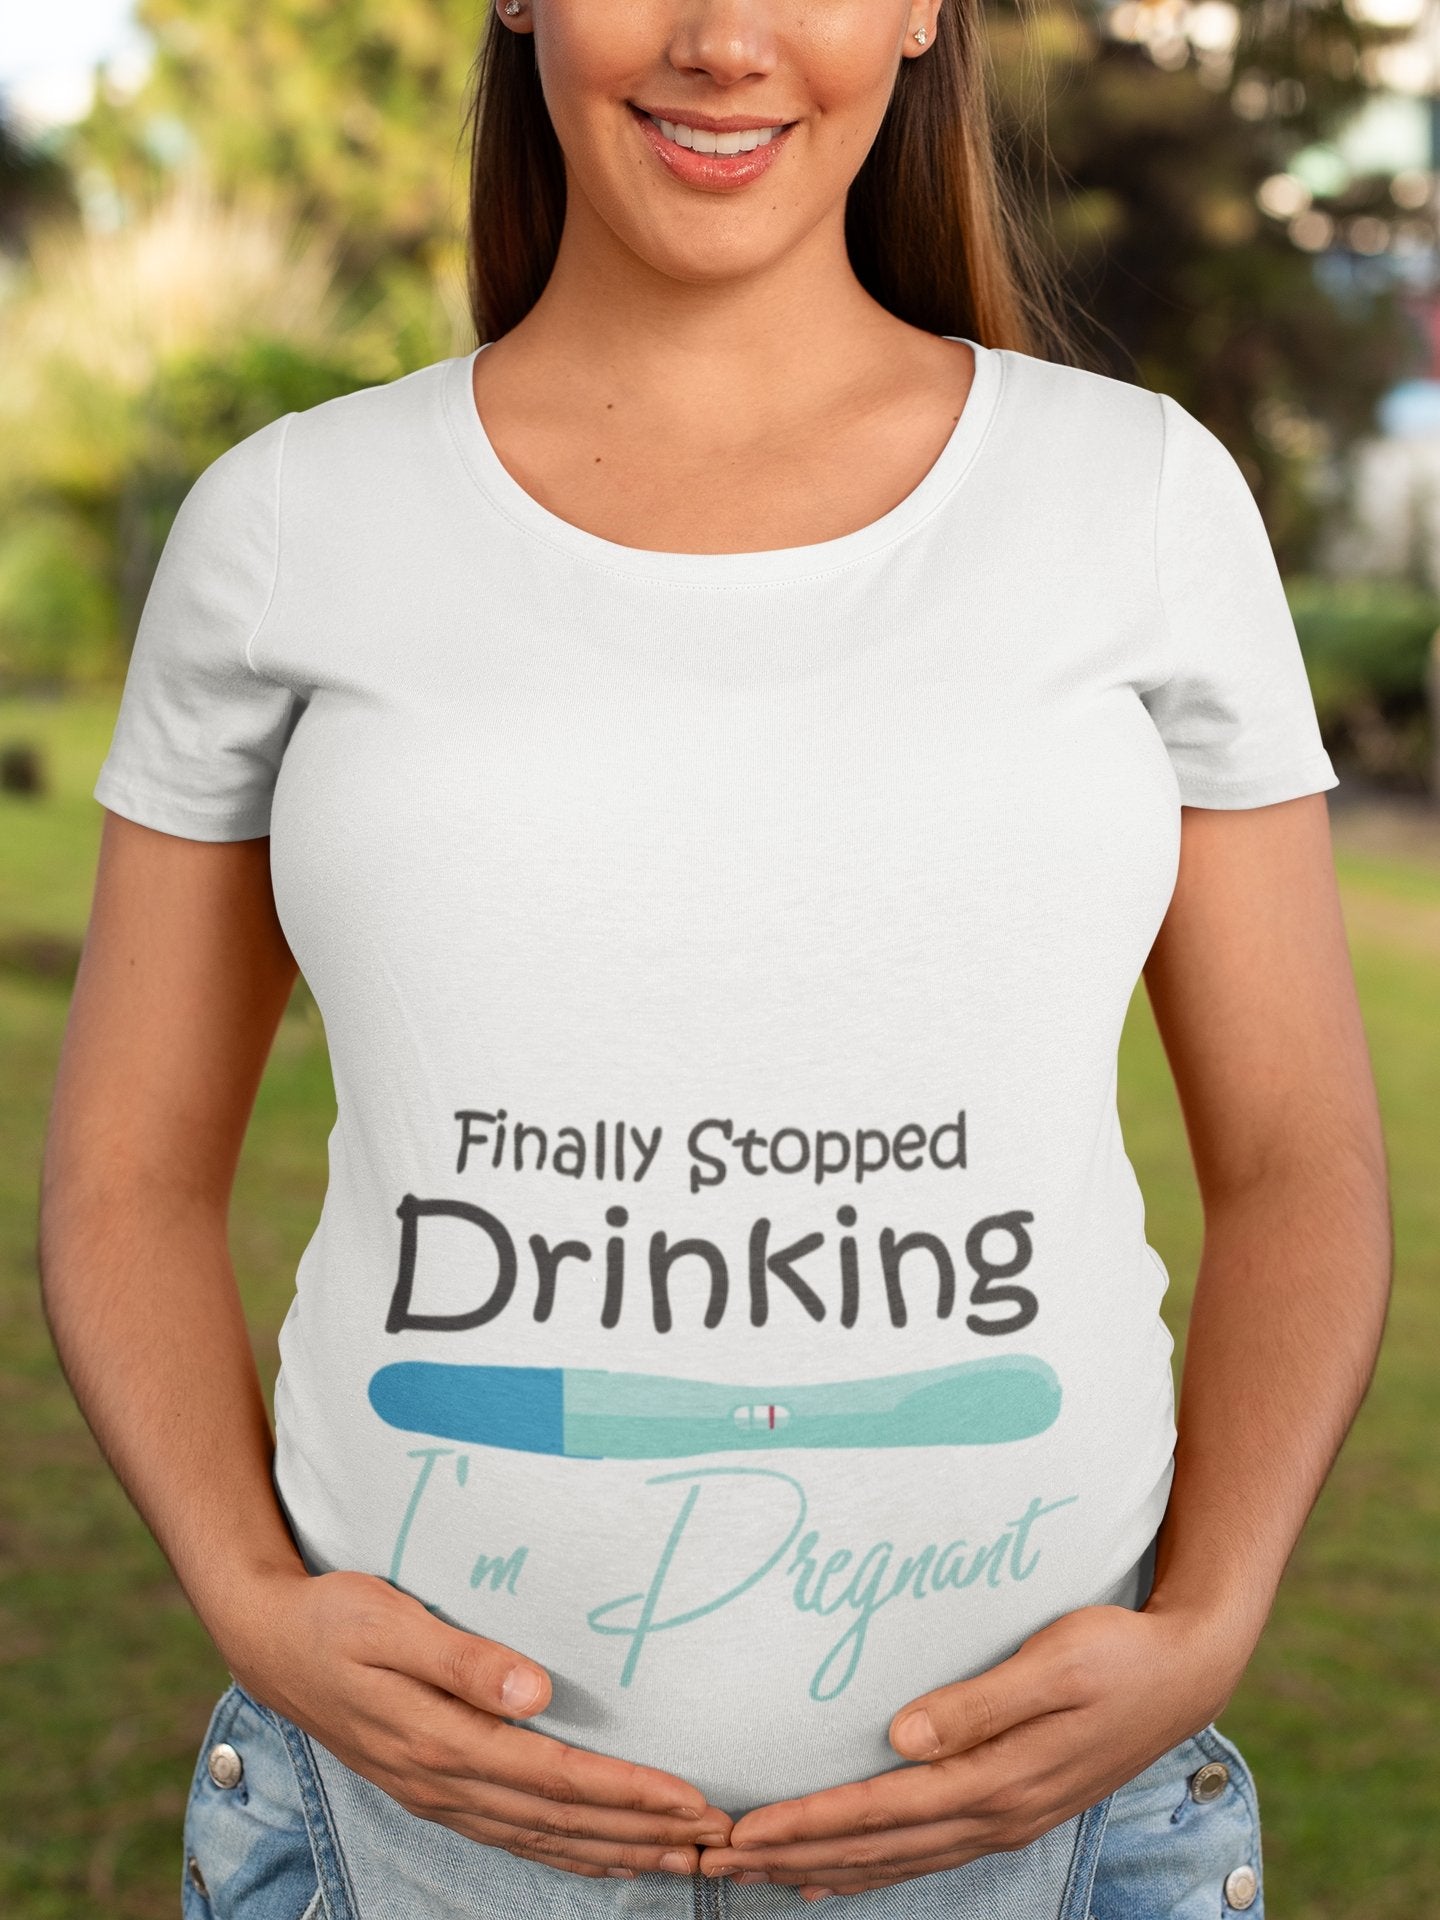 thelegalgang,Finally Stopped Drinking Funny Maternity T shirt,WOMEN.